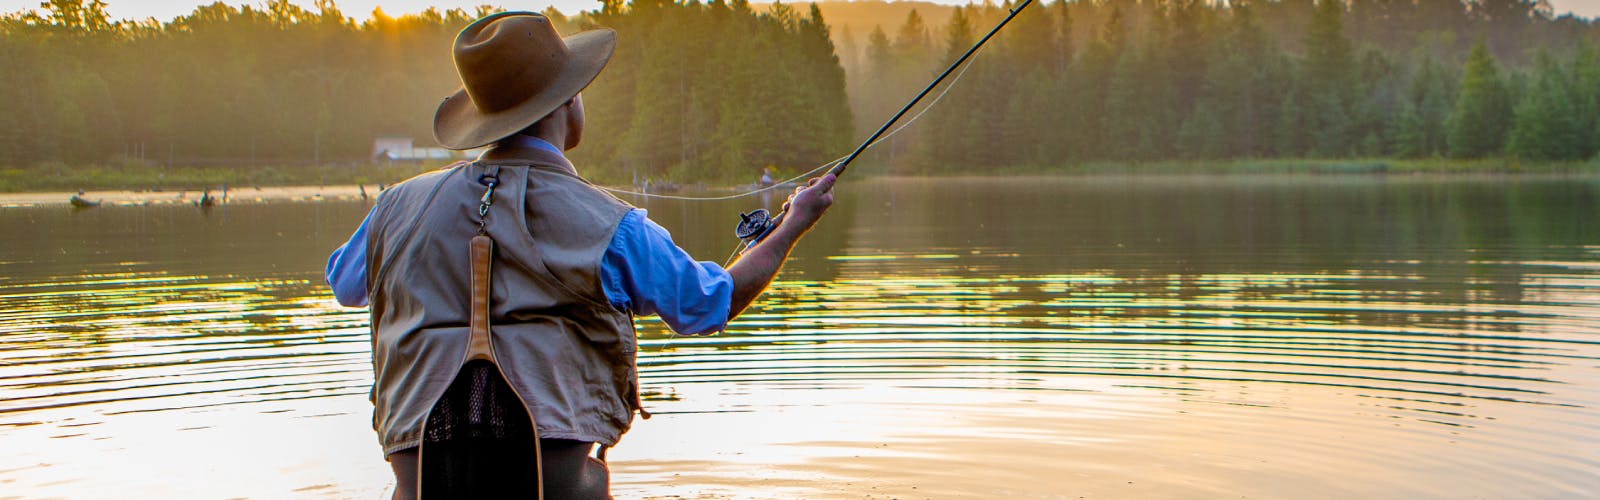 The 11 Best Fishing Brands